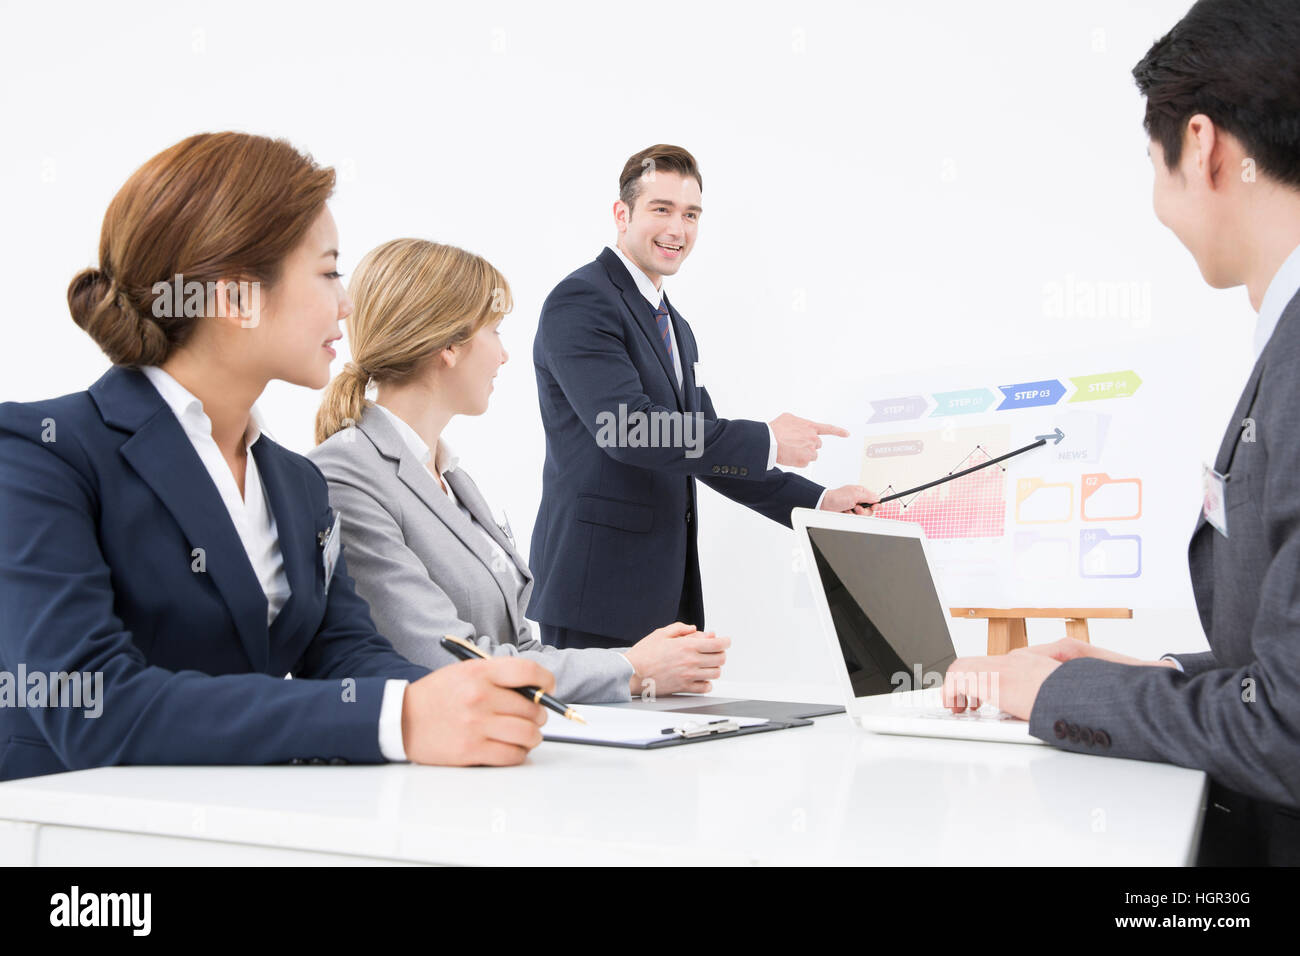 Global business people at presentation Stock Photo